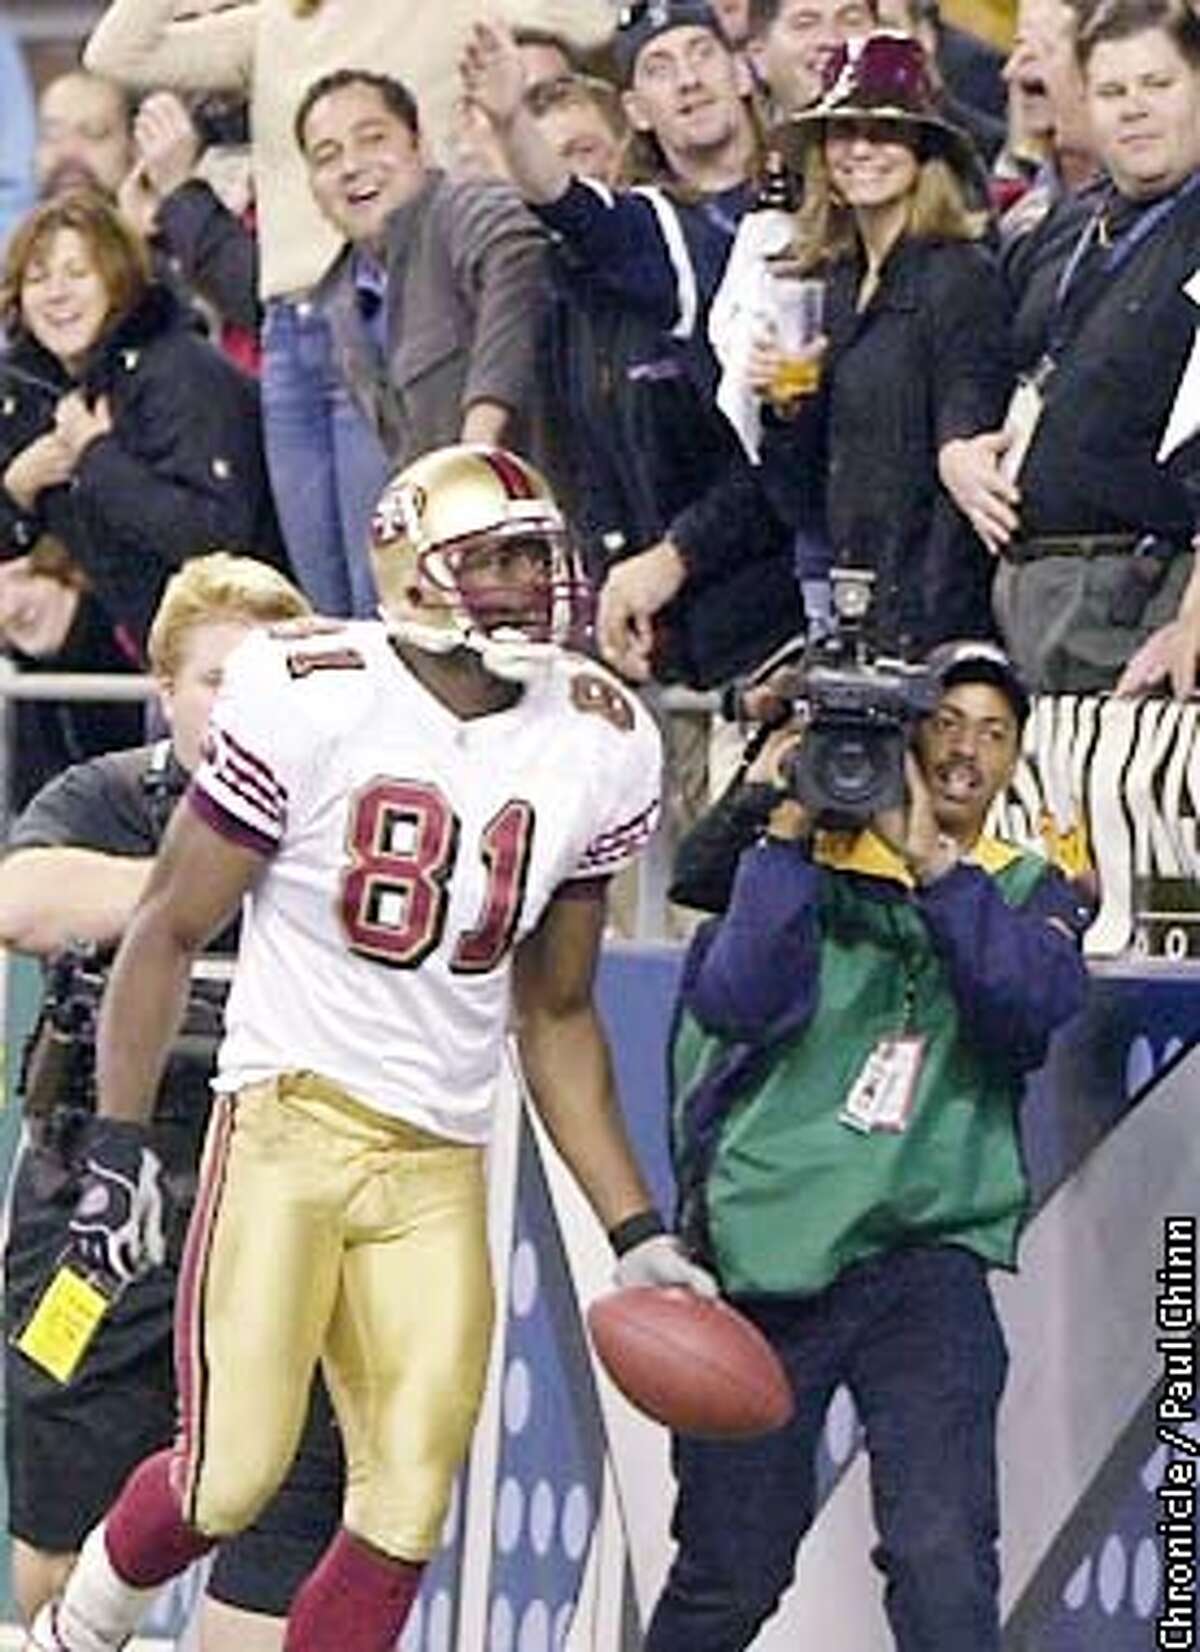 49ERS9-C-14OCT02-SP-PC After autographing the ball, Terrell Owens hand delivered the game ball to a fan in the stands after scoring the game-winning TD. The 49ers played the Seattle Seahawks at Seahawk Stadium. PAUL CHINN/S.F. CHRONICLE